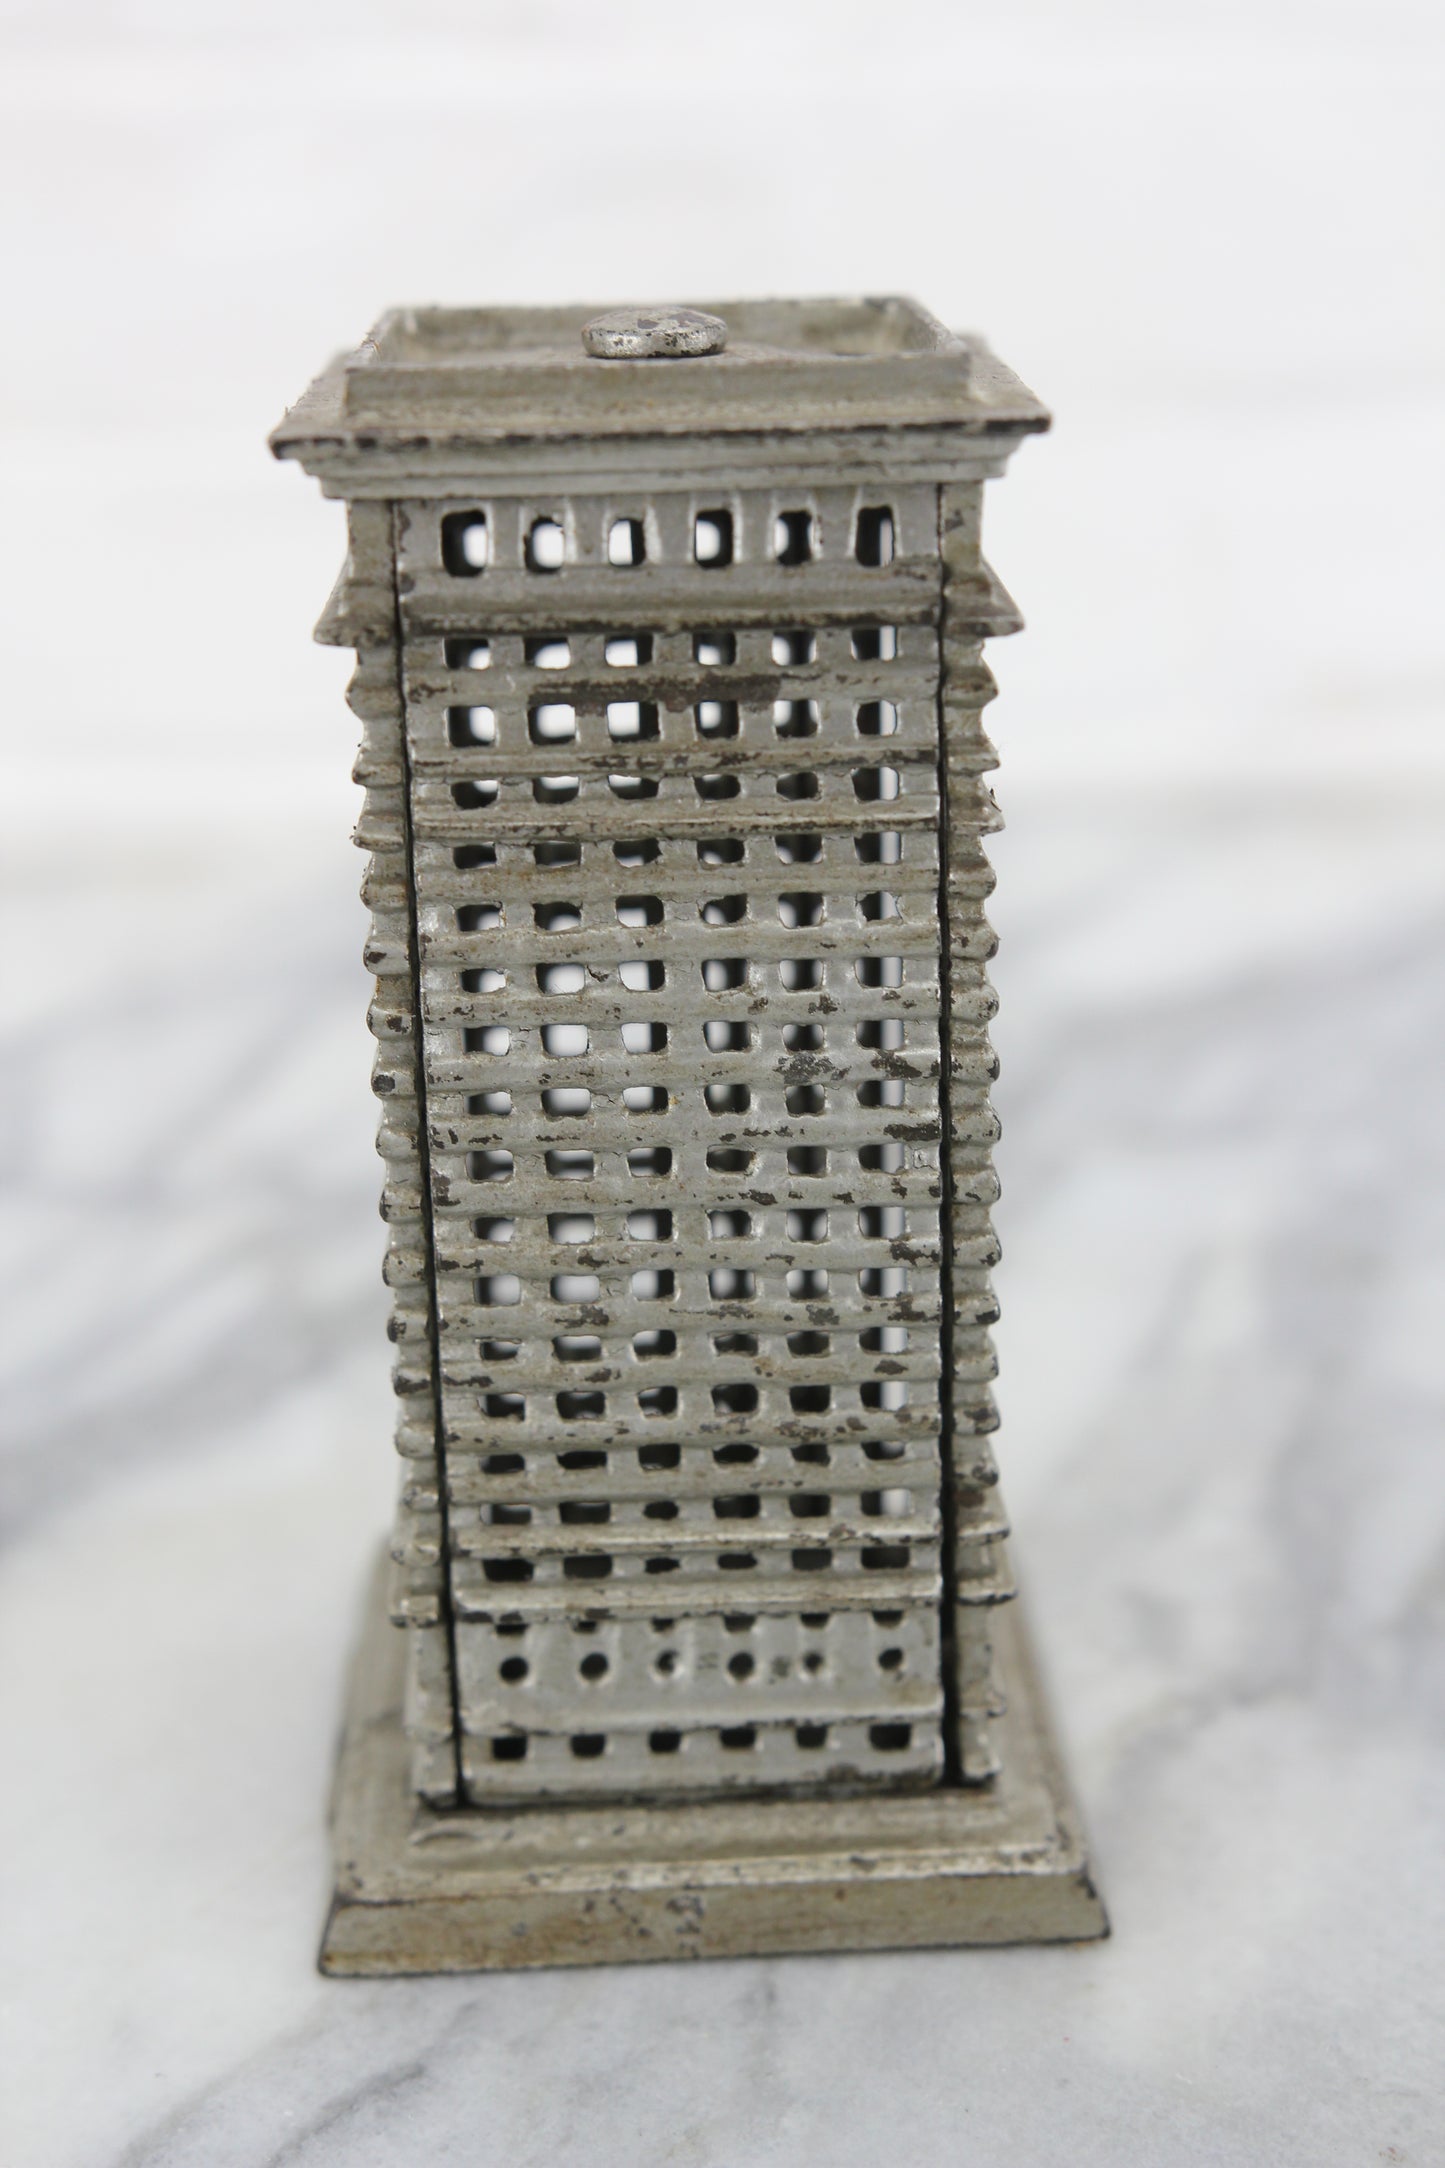 Architectural Tower Cast Iron Still Bank